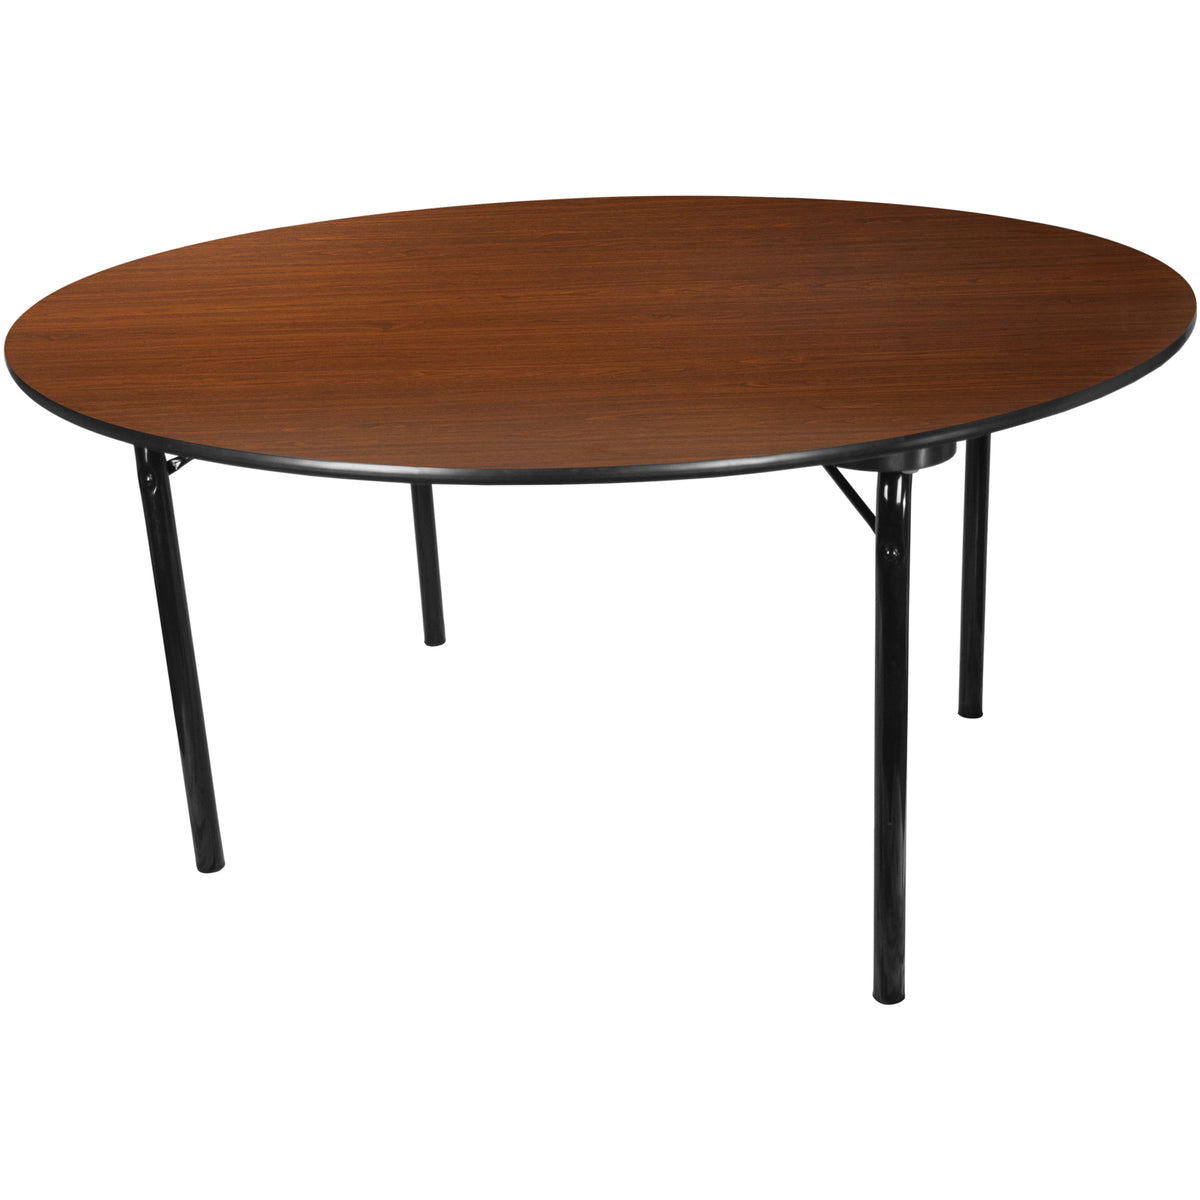 5 ft. Round High Pressure Laminate Folding Banquet Table